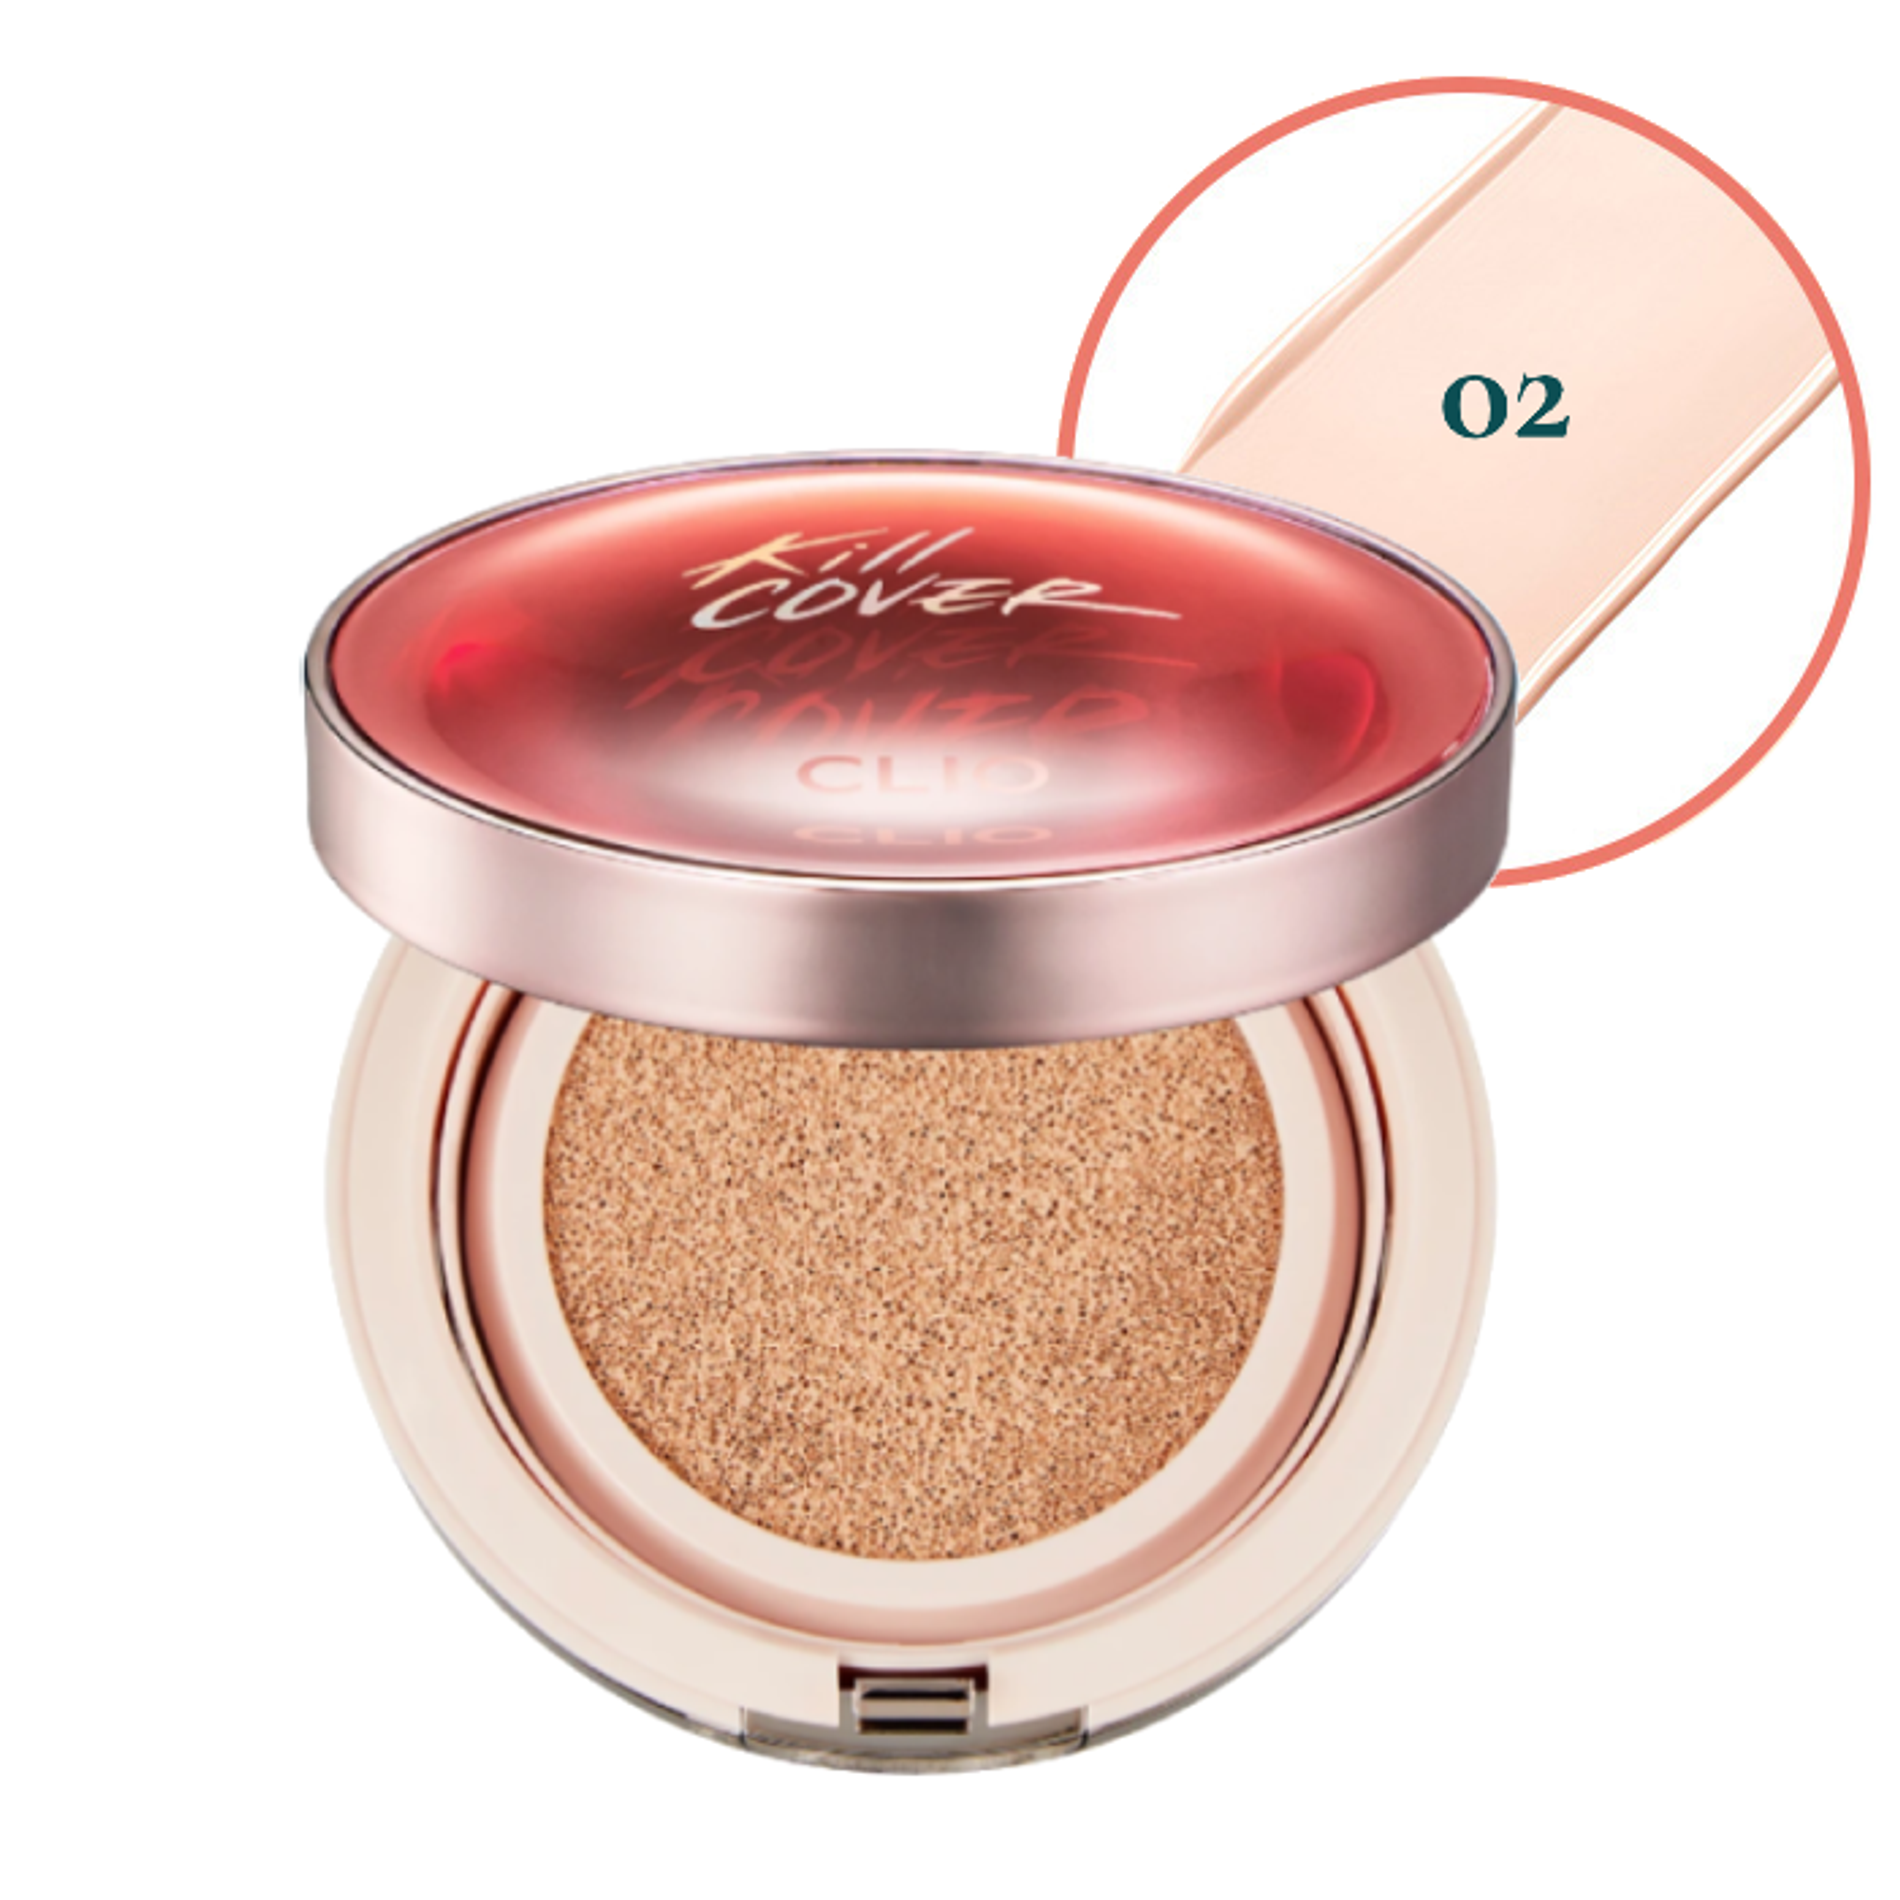 20ss-limited-phan-nuoc-hieu-ung-cang-muot-clio-kill-cover-glow-cushion-15g-2-7